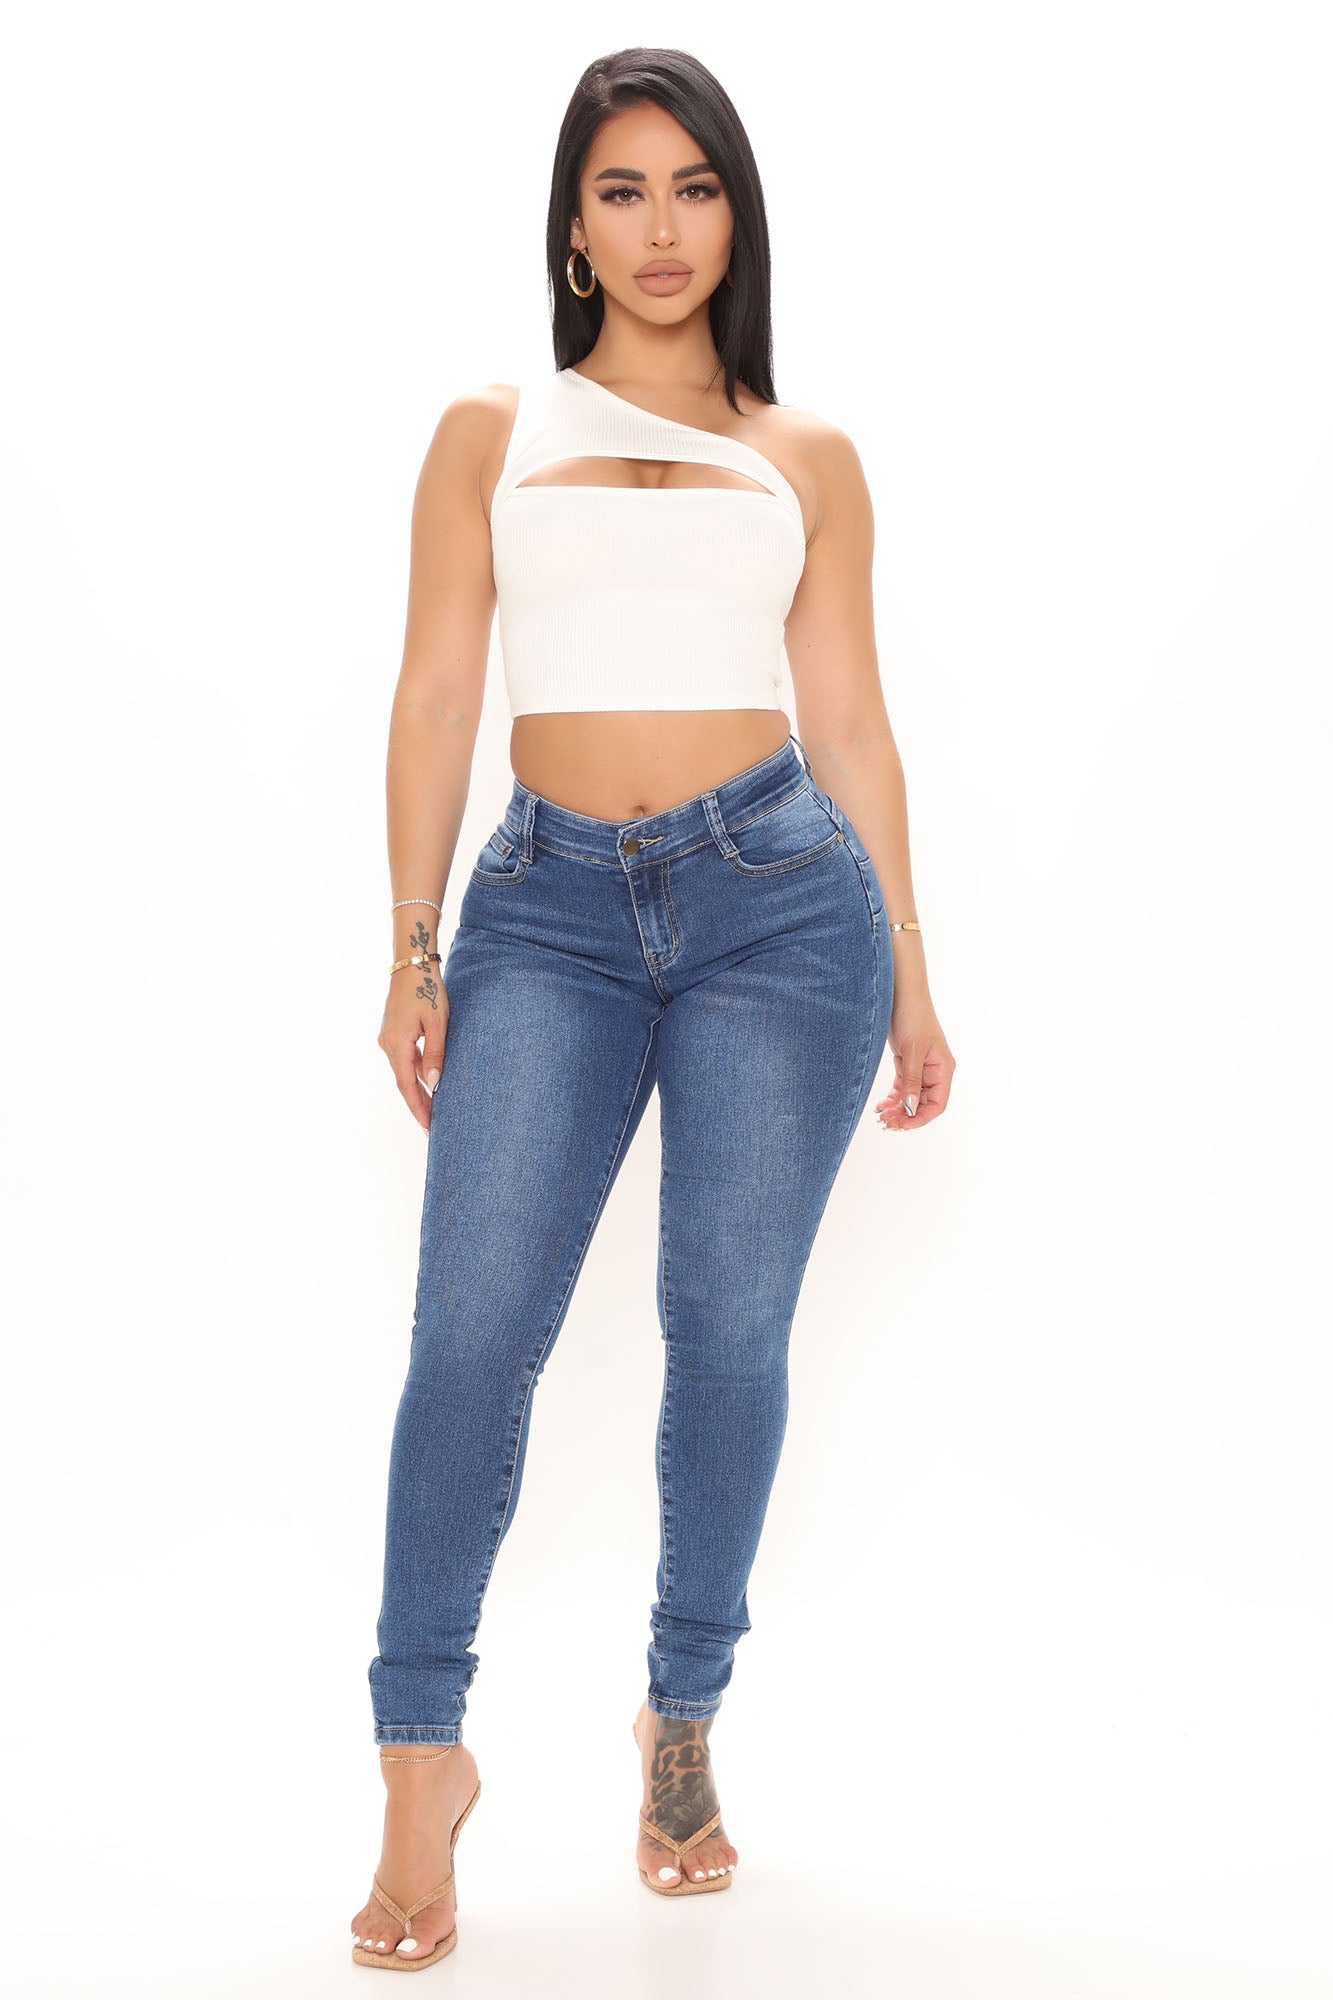 I Just Might Booty Shaping Jeans - Medium Wash